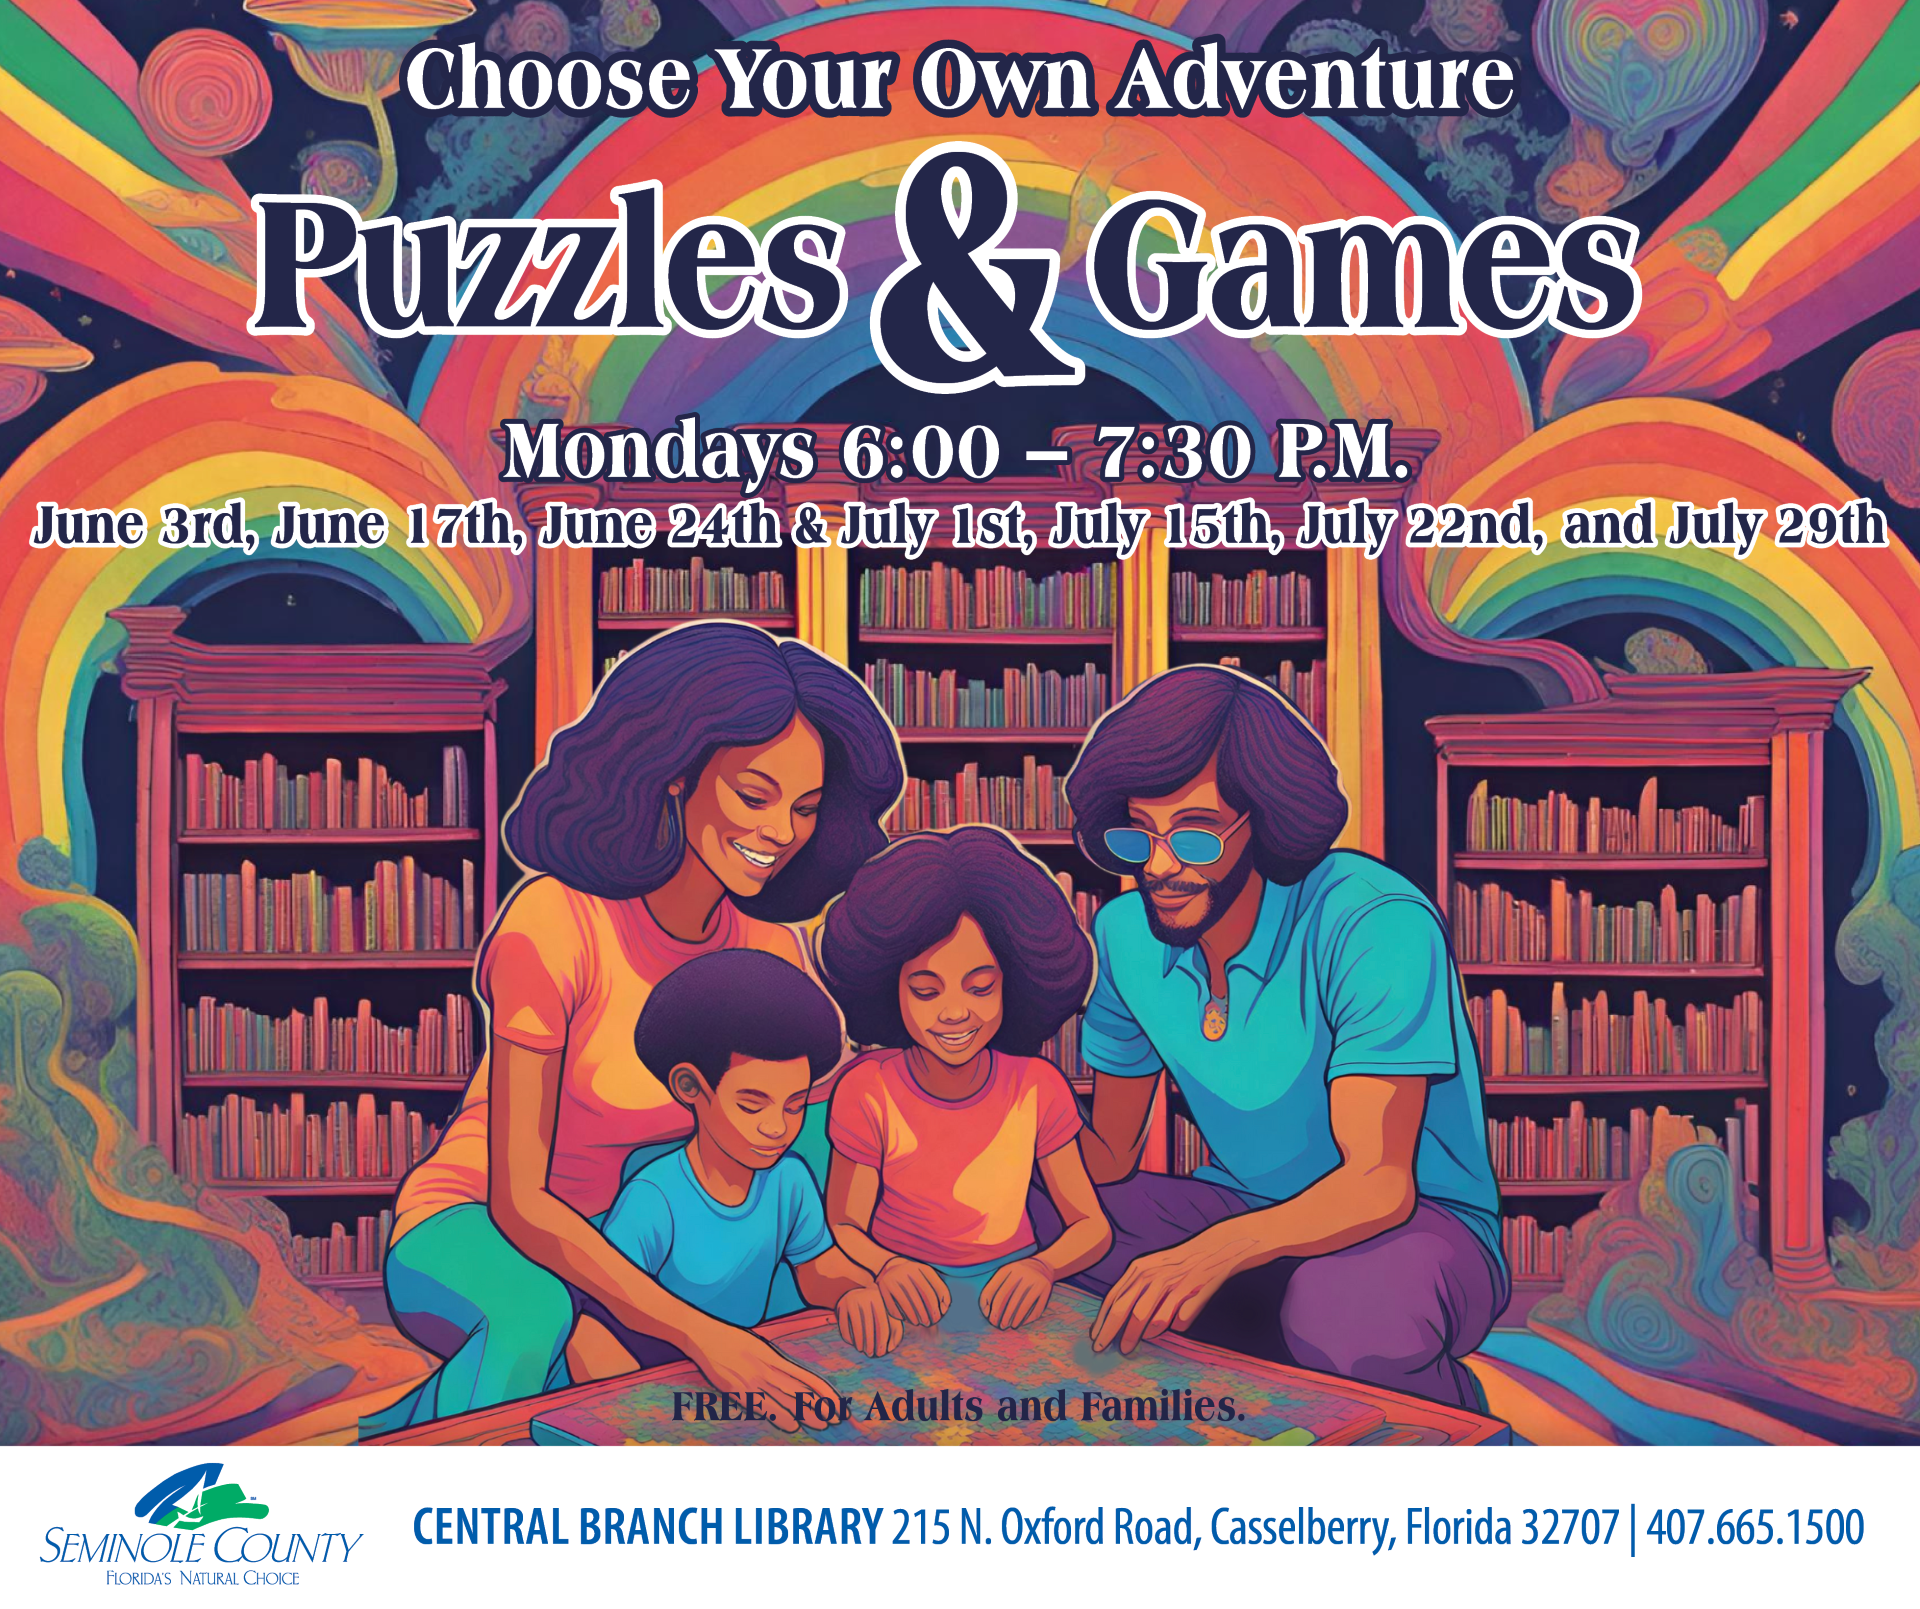 Choose Your Own Adventure Puzzles & Games program at Central Branch Library